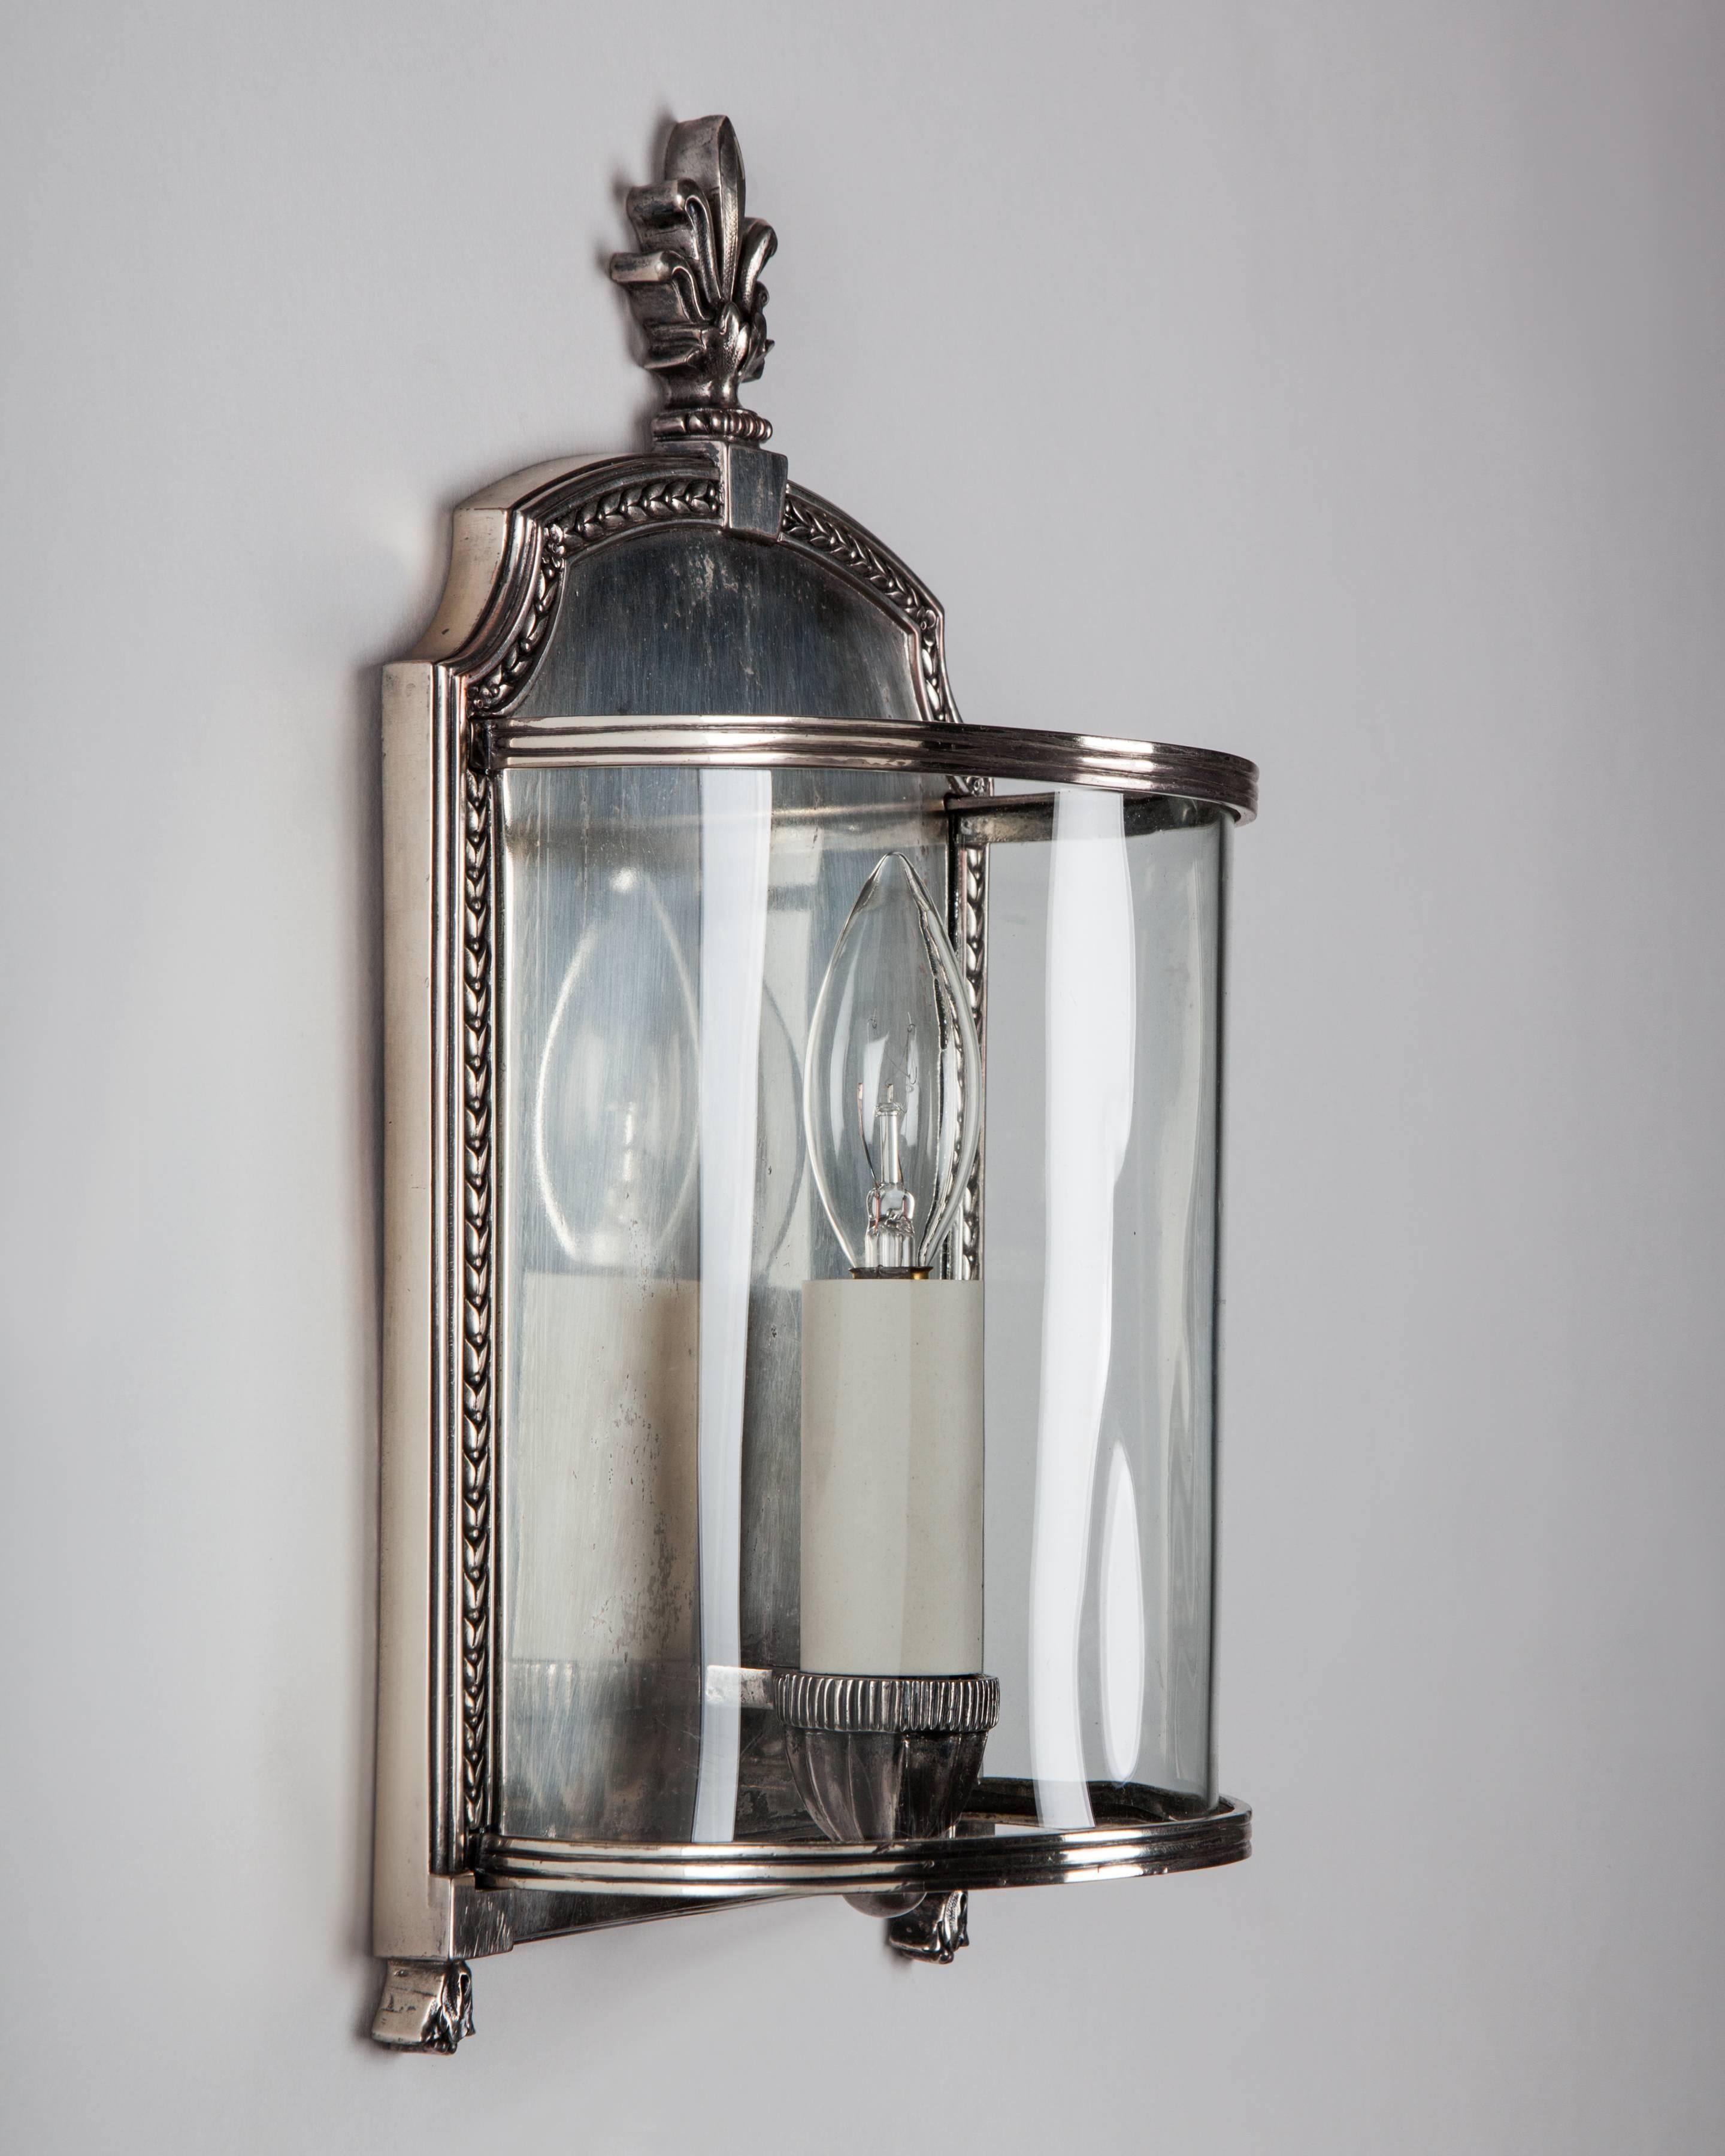 AIS3059
A pair of antique wall sconces with curved glass shades in their original aged silver plate. By the New York maker E. F. Caldwell Co. Due to the antique nature of this fixture, there may be some nicks or imperfections in the